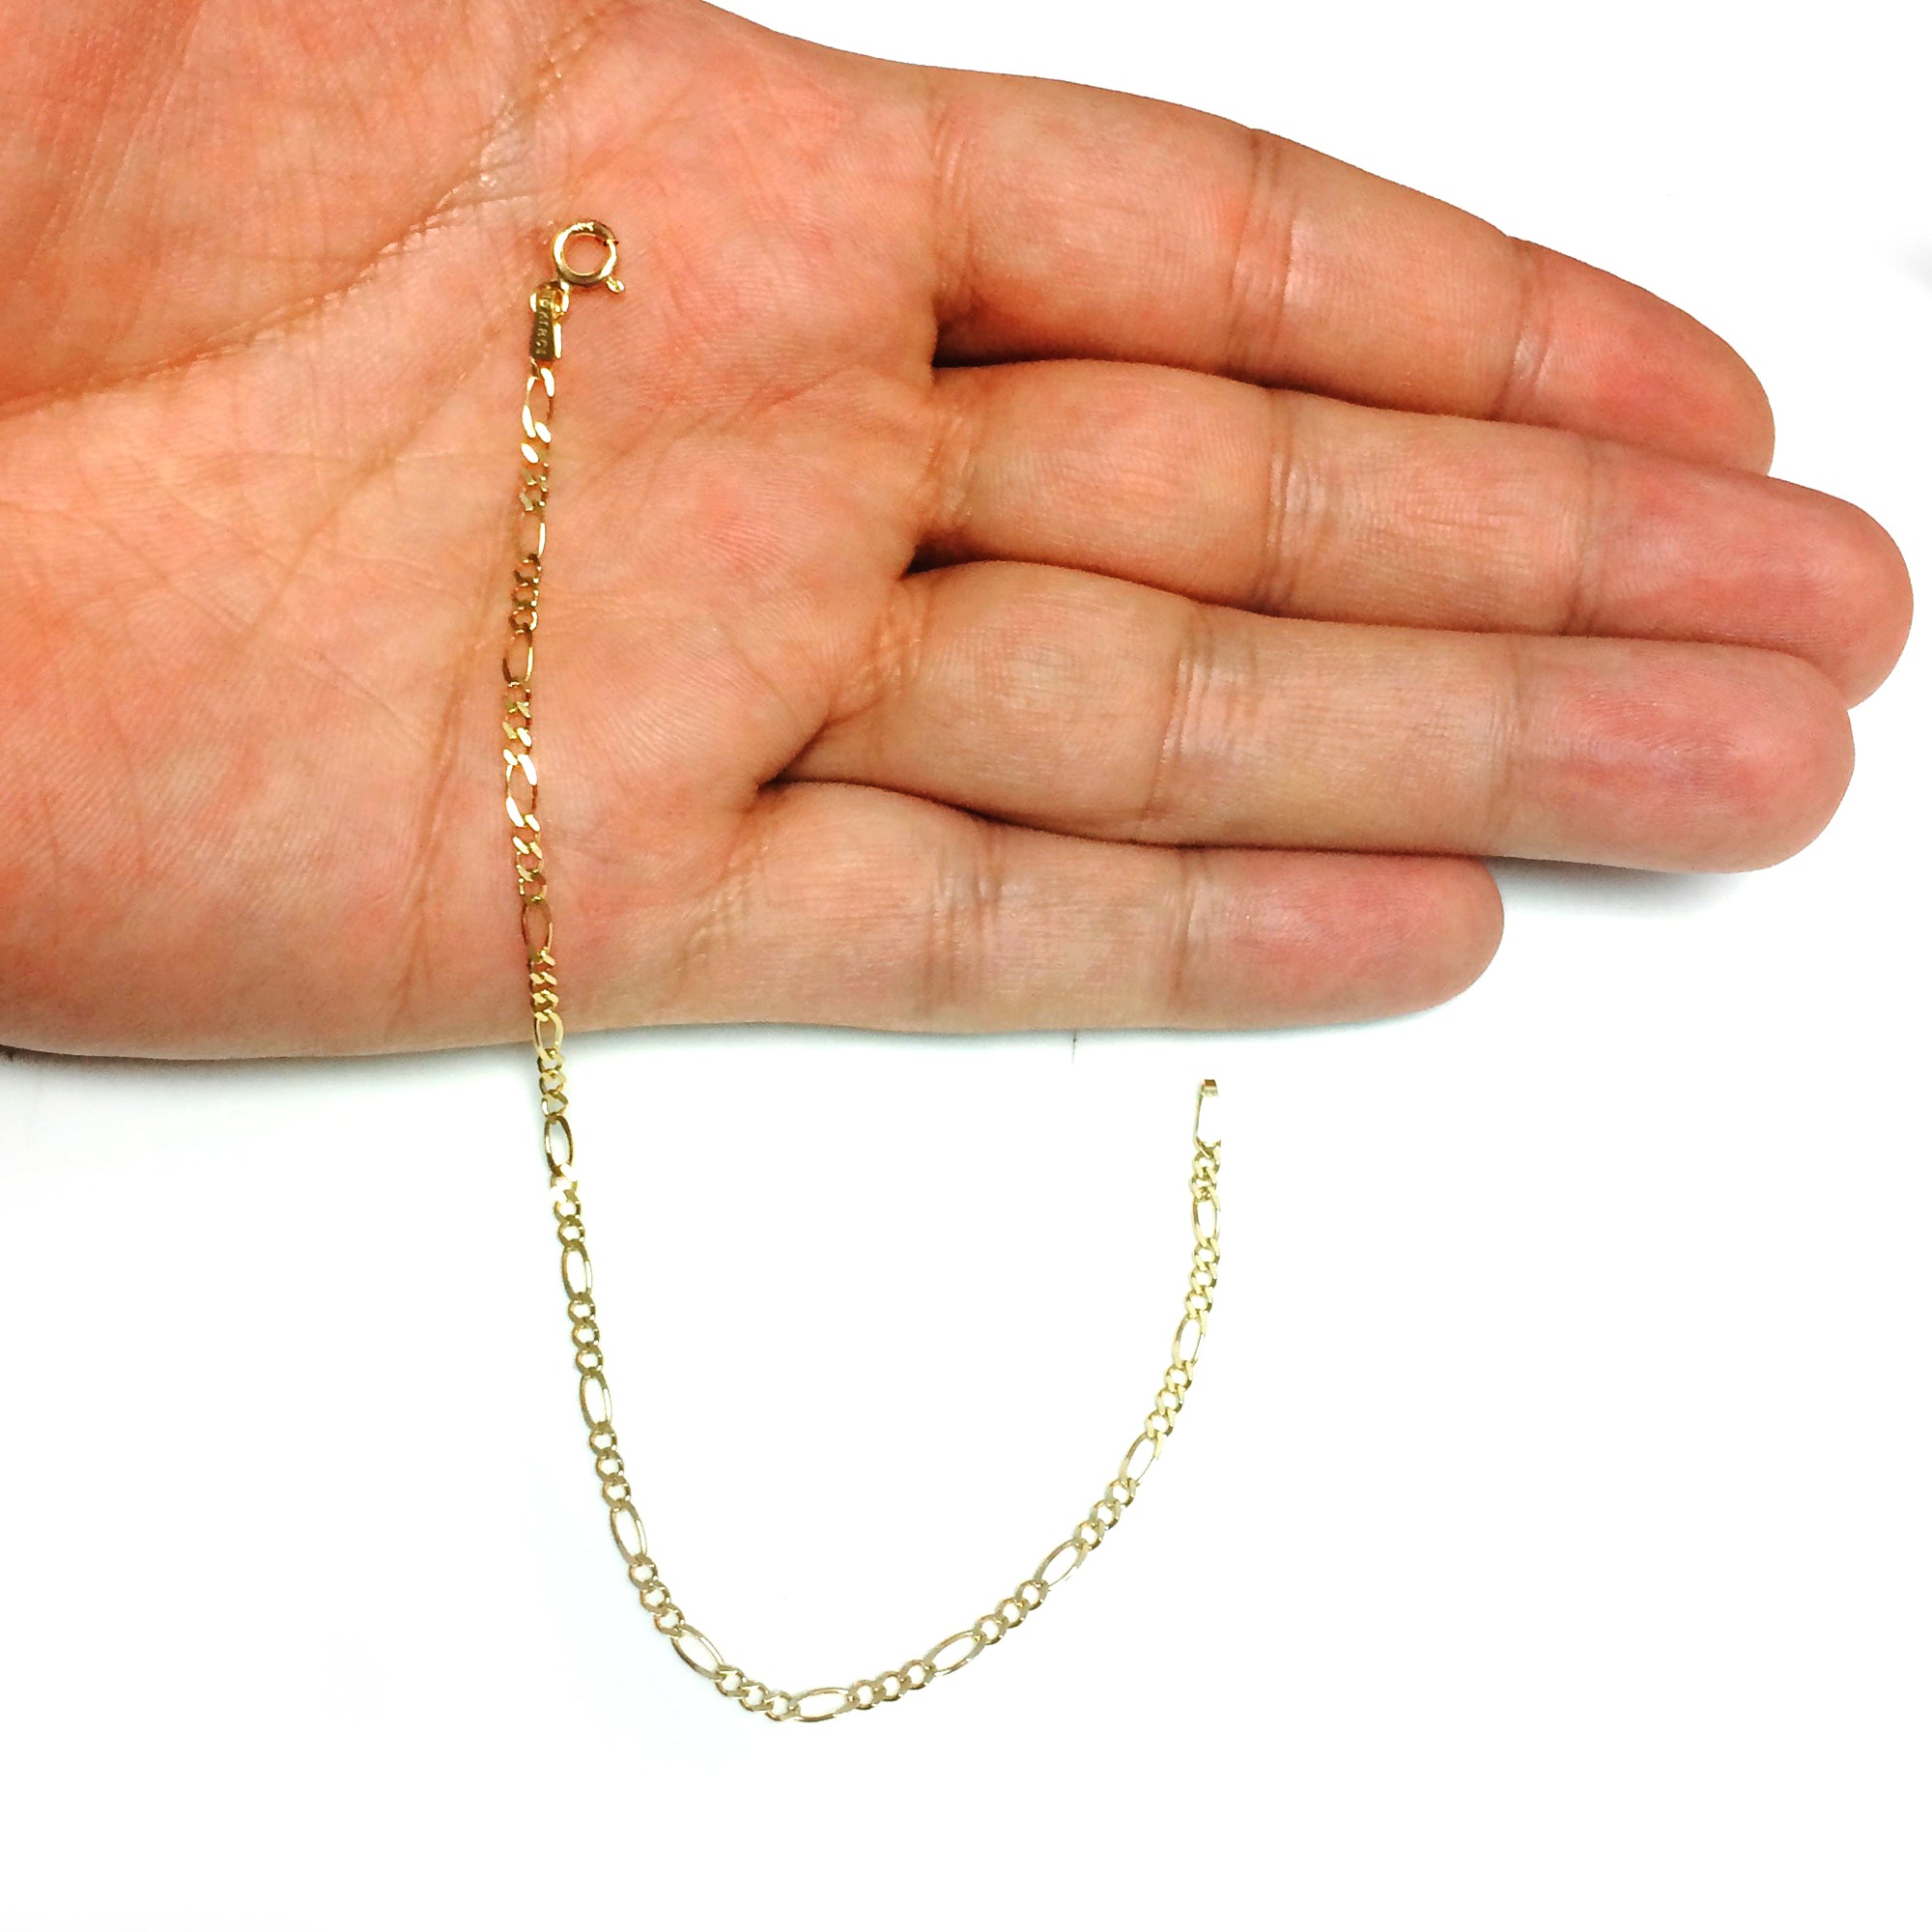 10k Yellow Solid Gold Figaro Chain Bracelet, 1.9mm, 7" fine designer jewelry for men and women